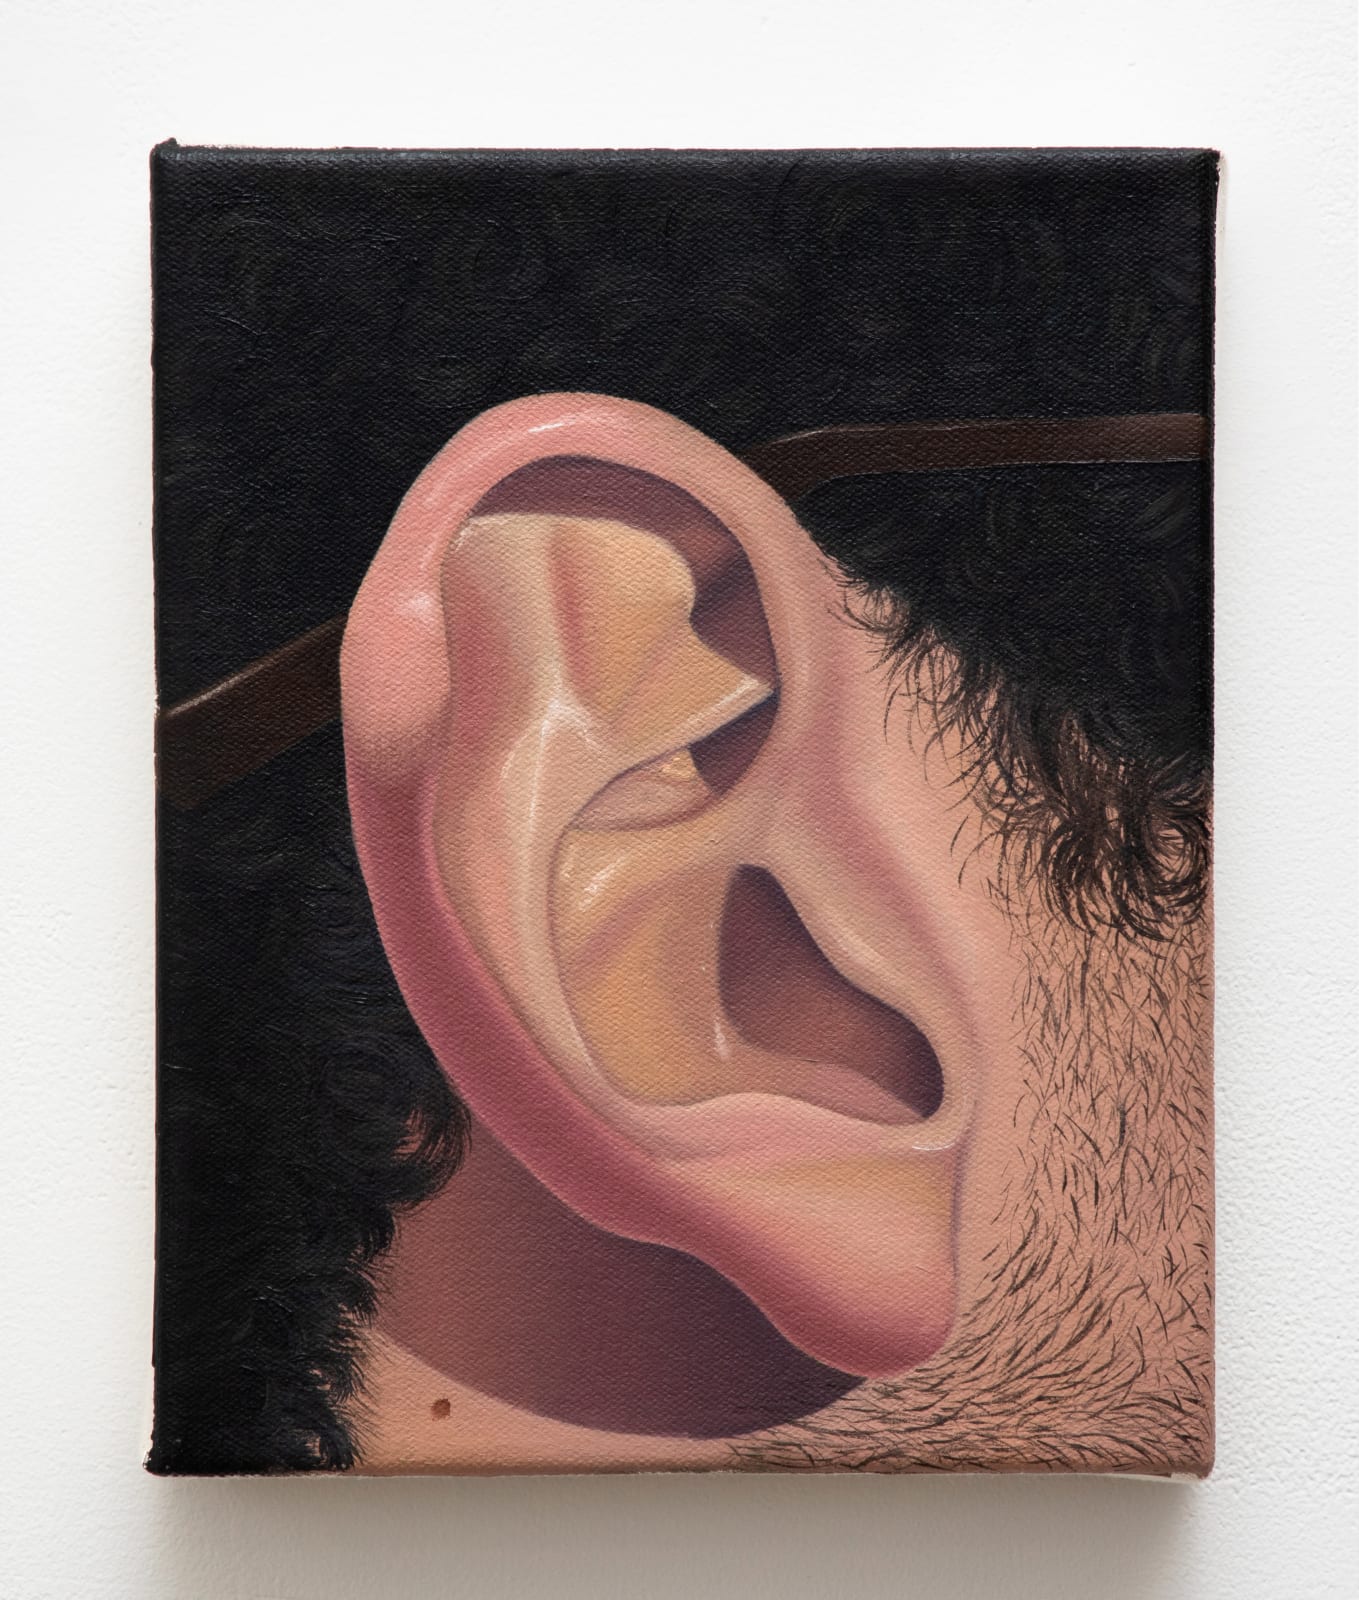 Painting portraying a close-up view of a male’s right ear in the center of the composition.